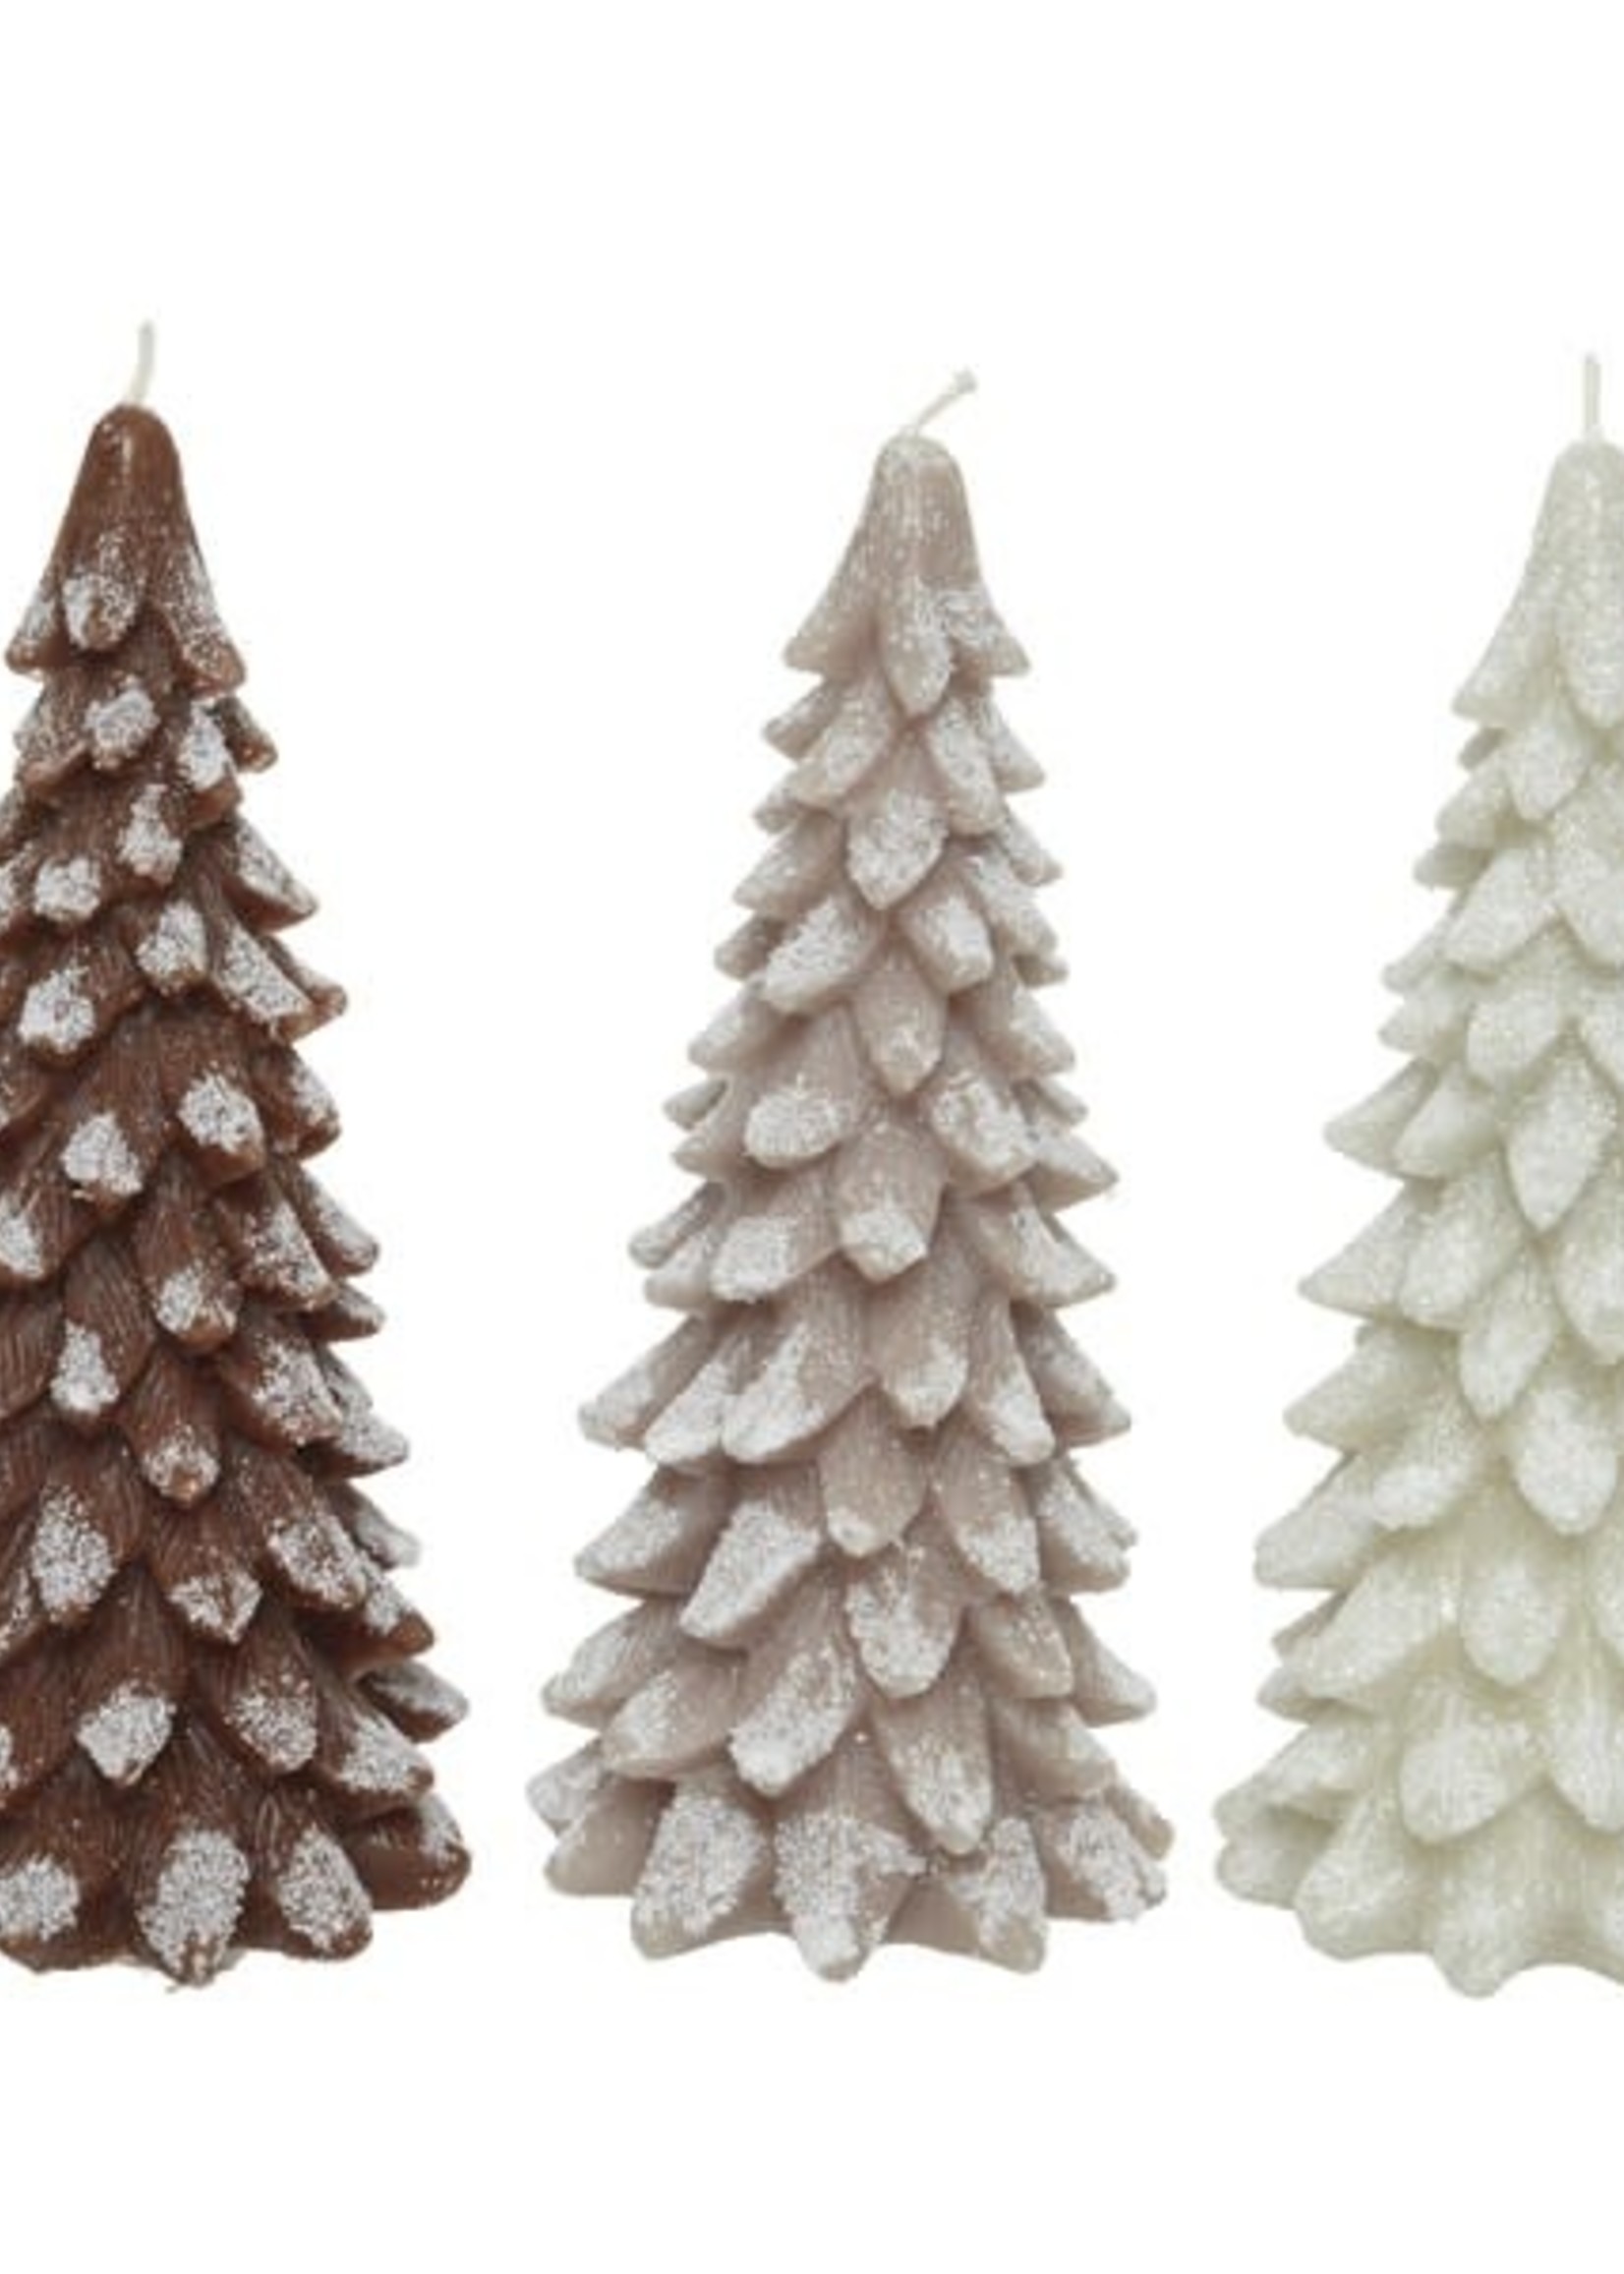 Decoris Tree Wax Candles - Cream, Brown, Light Brown  (price is for one)